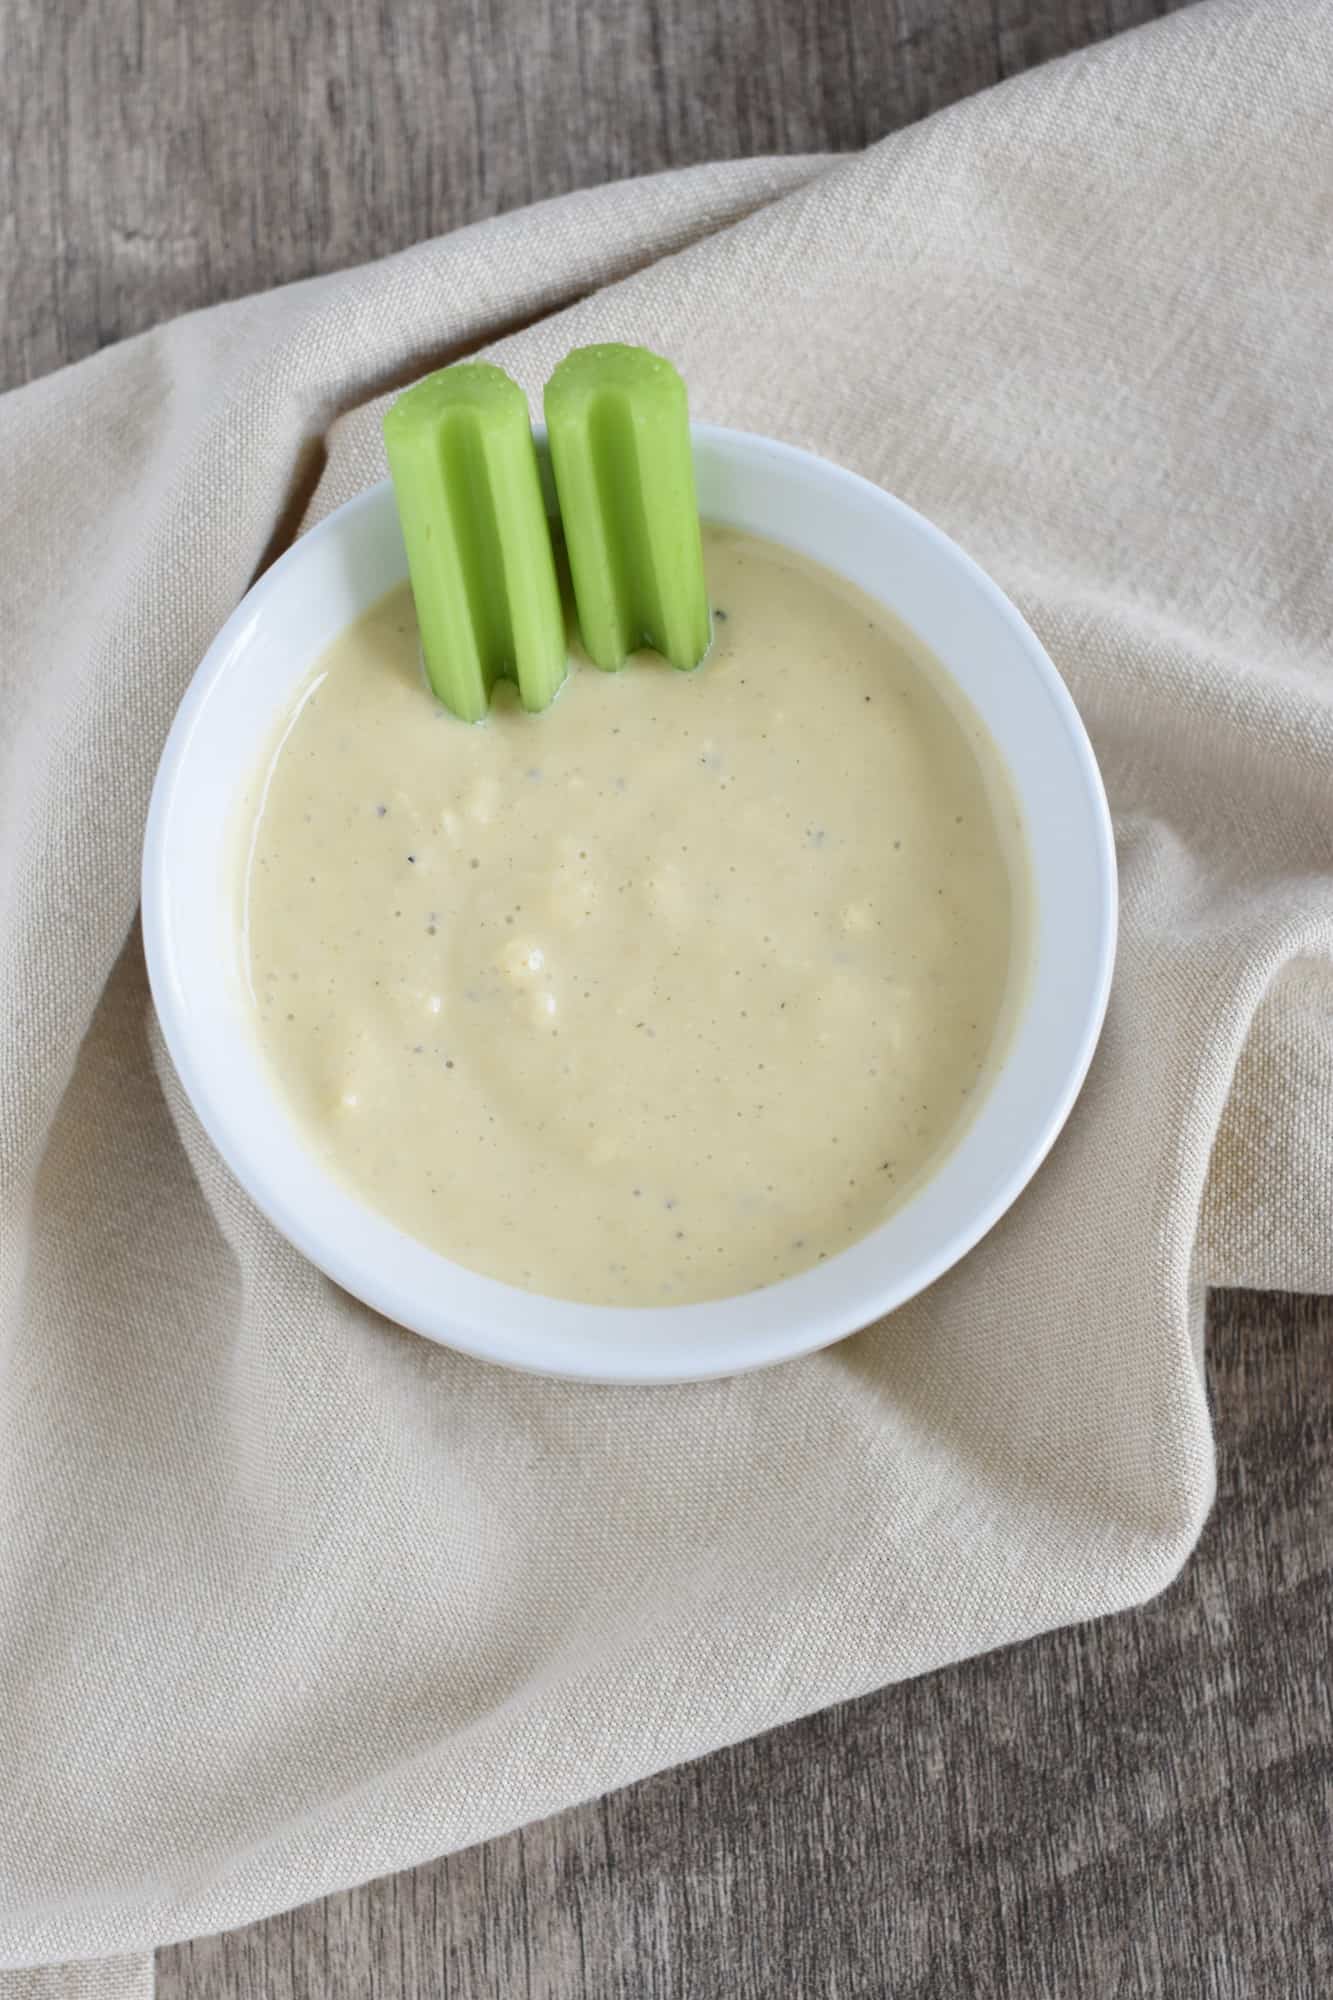 two celery sticks in the dressing in a white serving bowl